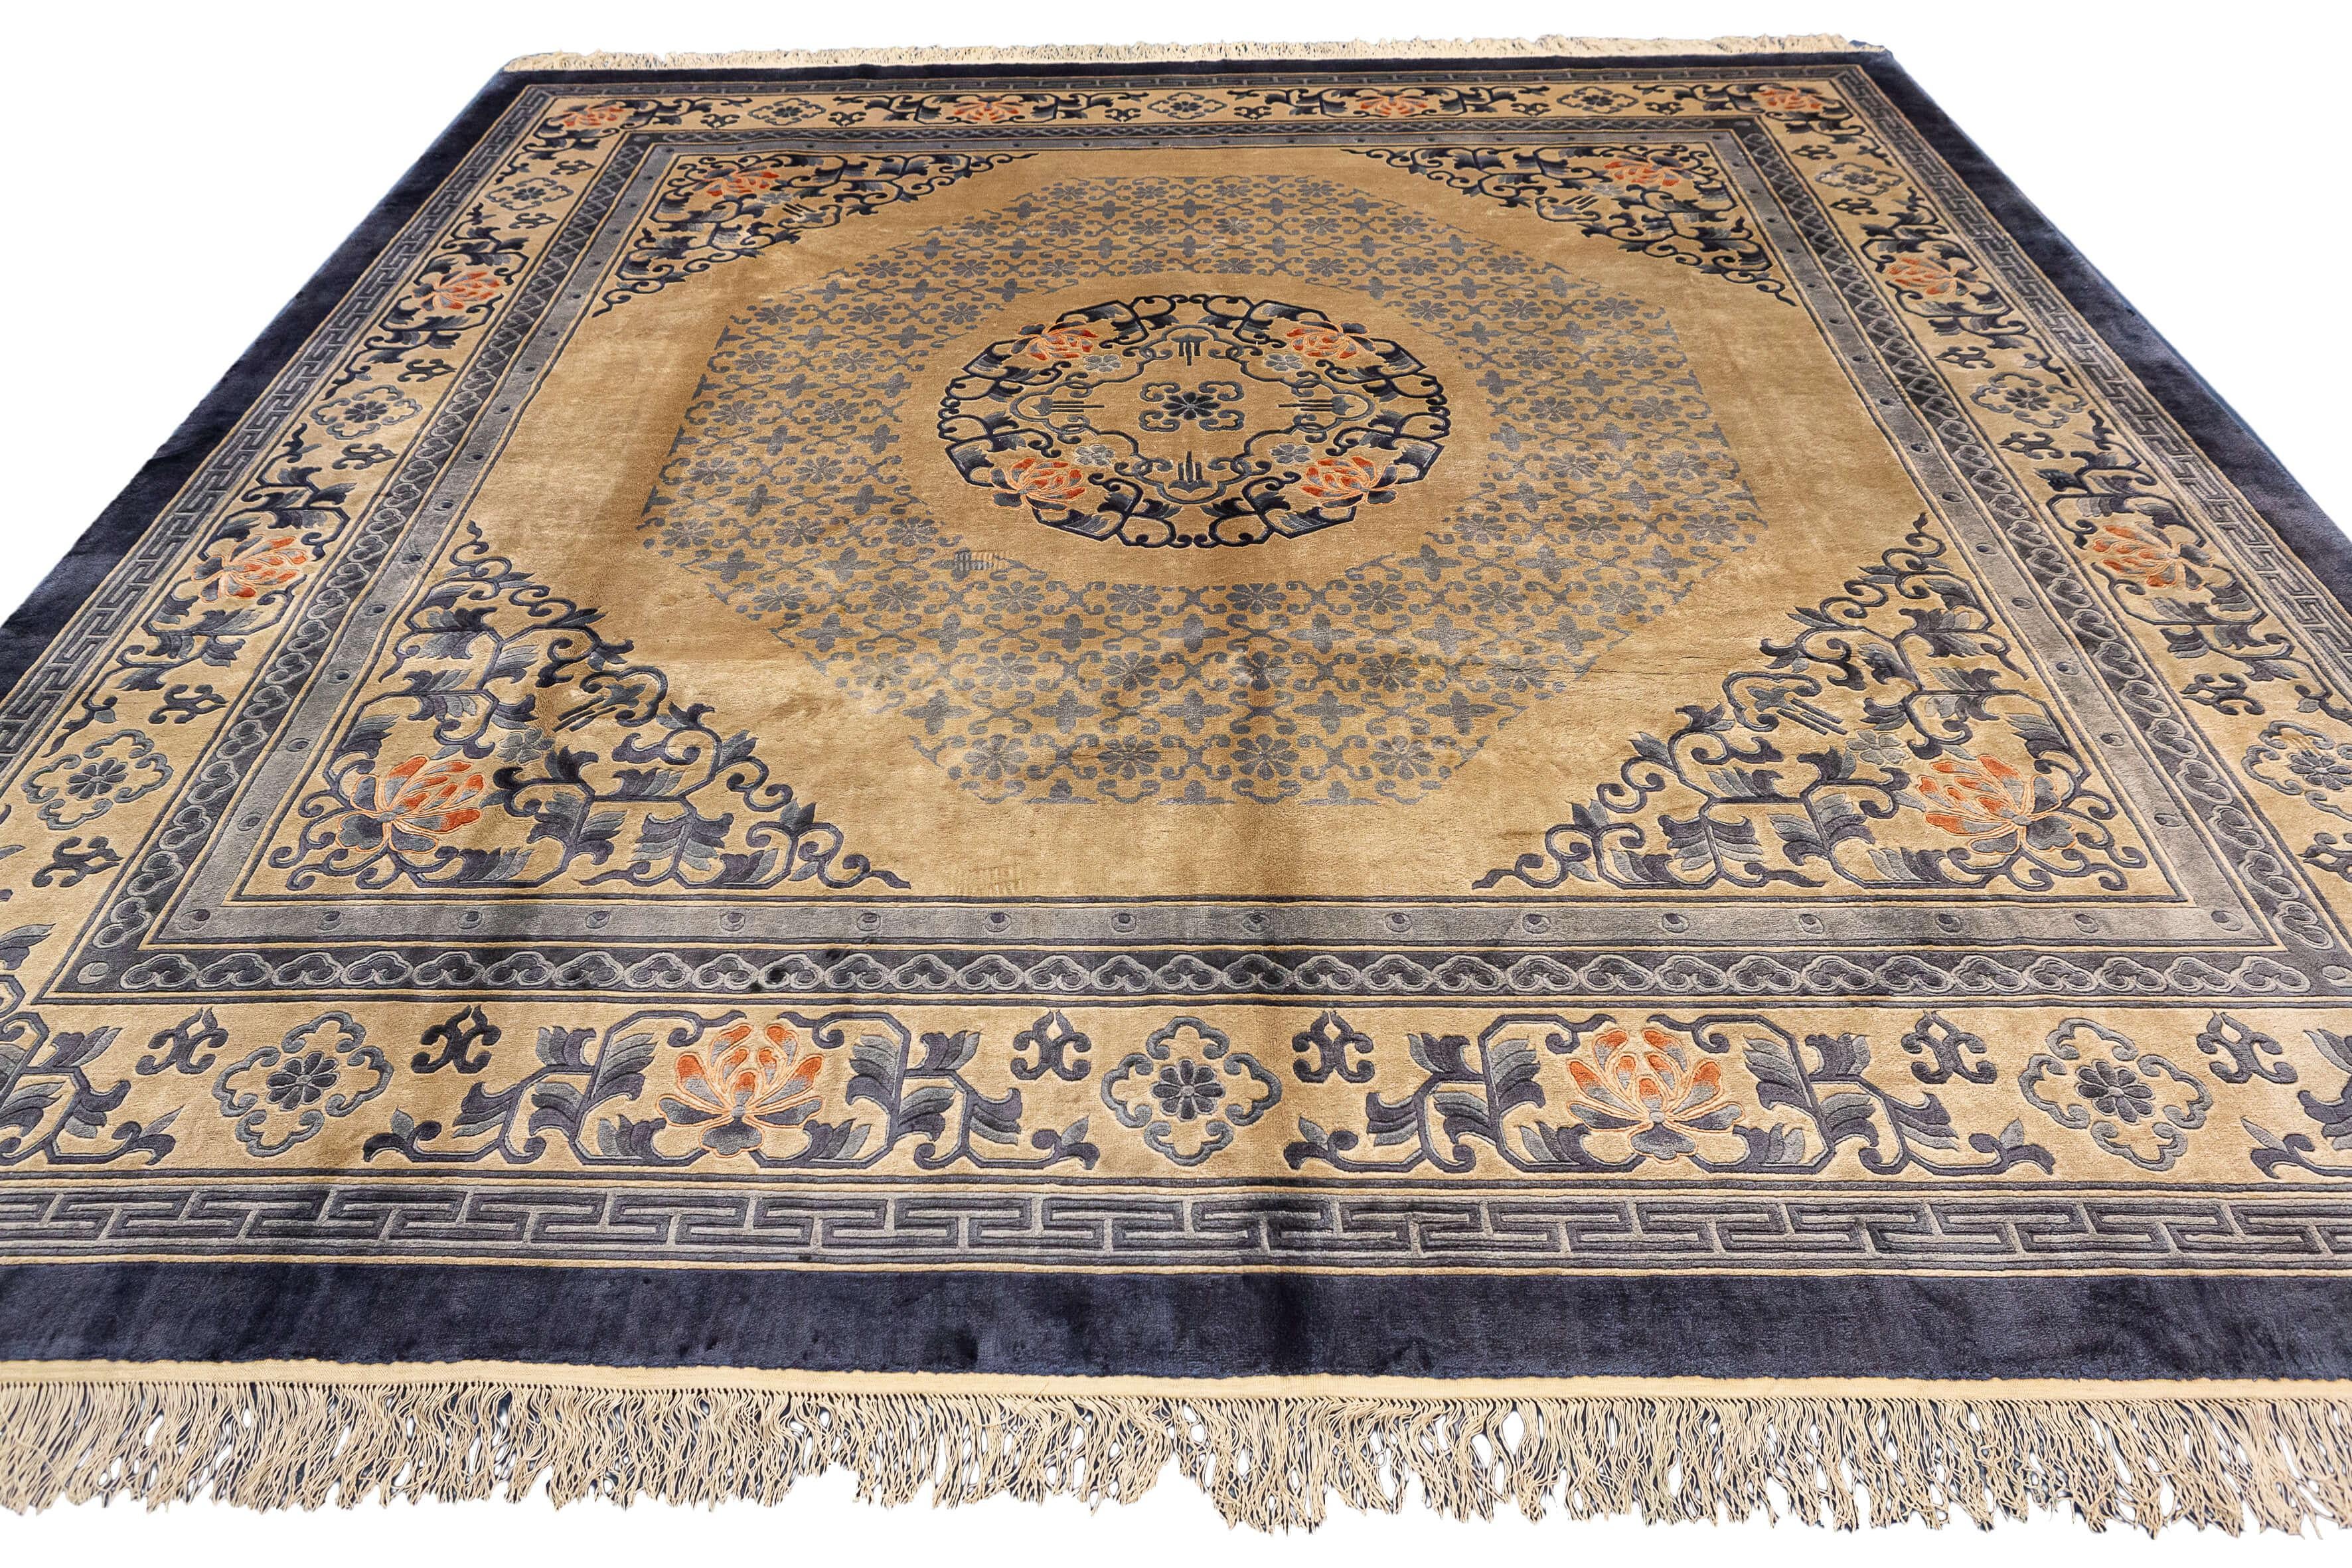 The Antique Silk Chinese Beige Color textile is a truly unique and special piece that exudes elegance and timeless beauty. Crafted from exquisite silk, this antique textile stands out as a remarkable artifact of Chinese craftsmanship. The delicate